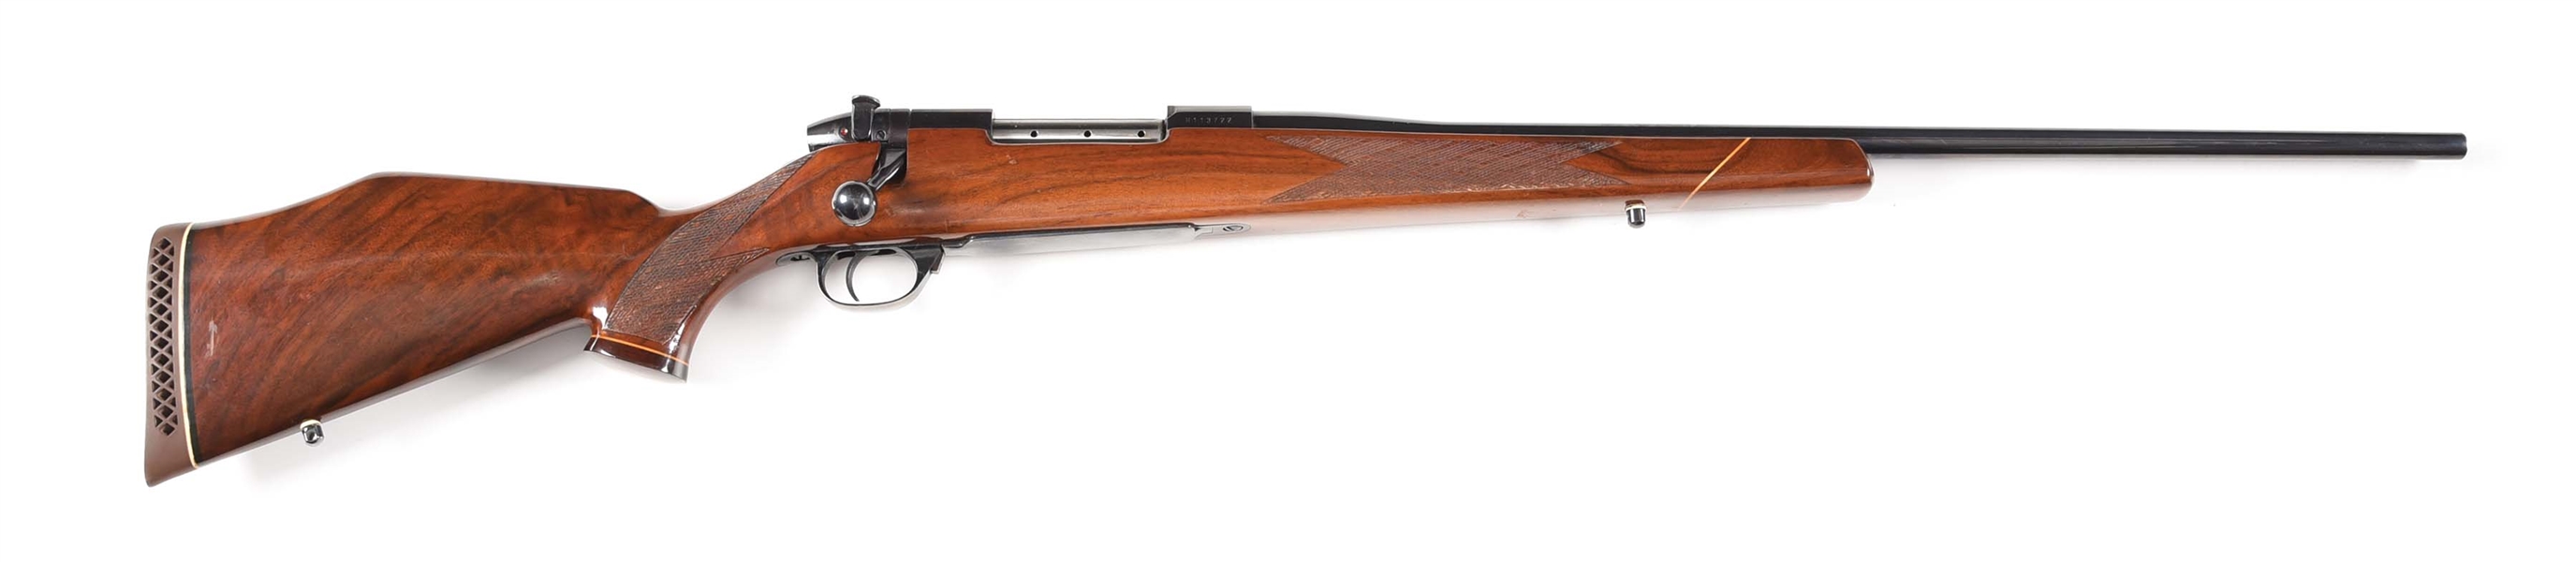 (M) WEATHERBY MARK V DELUXE BOLT ACTION RIFLE